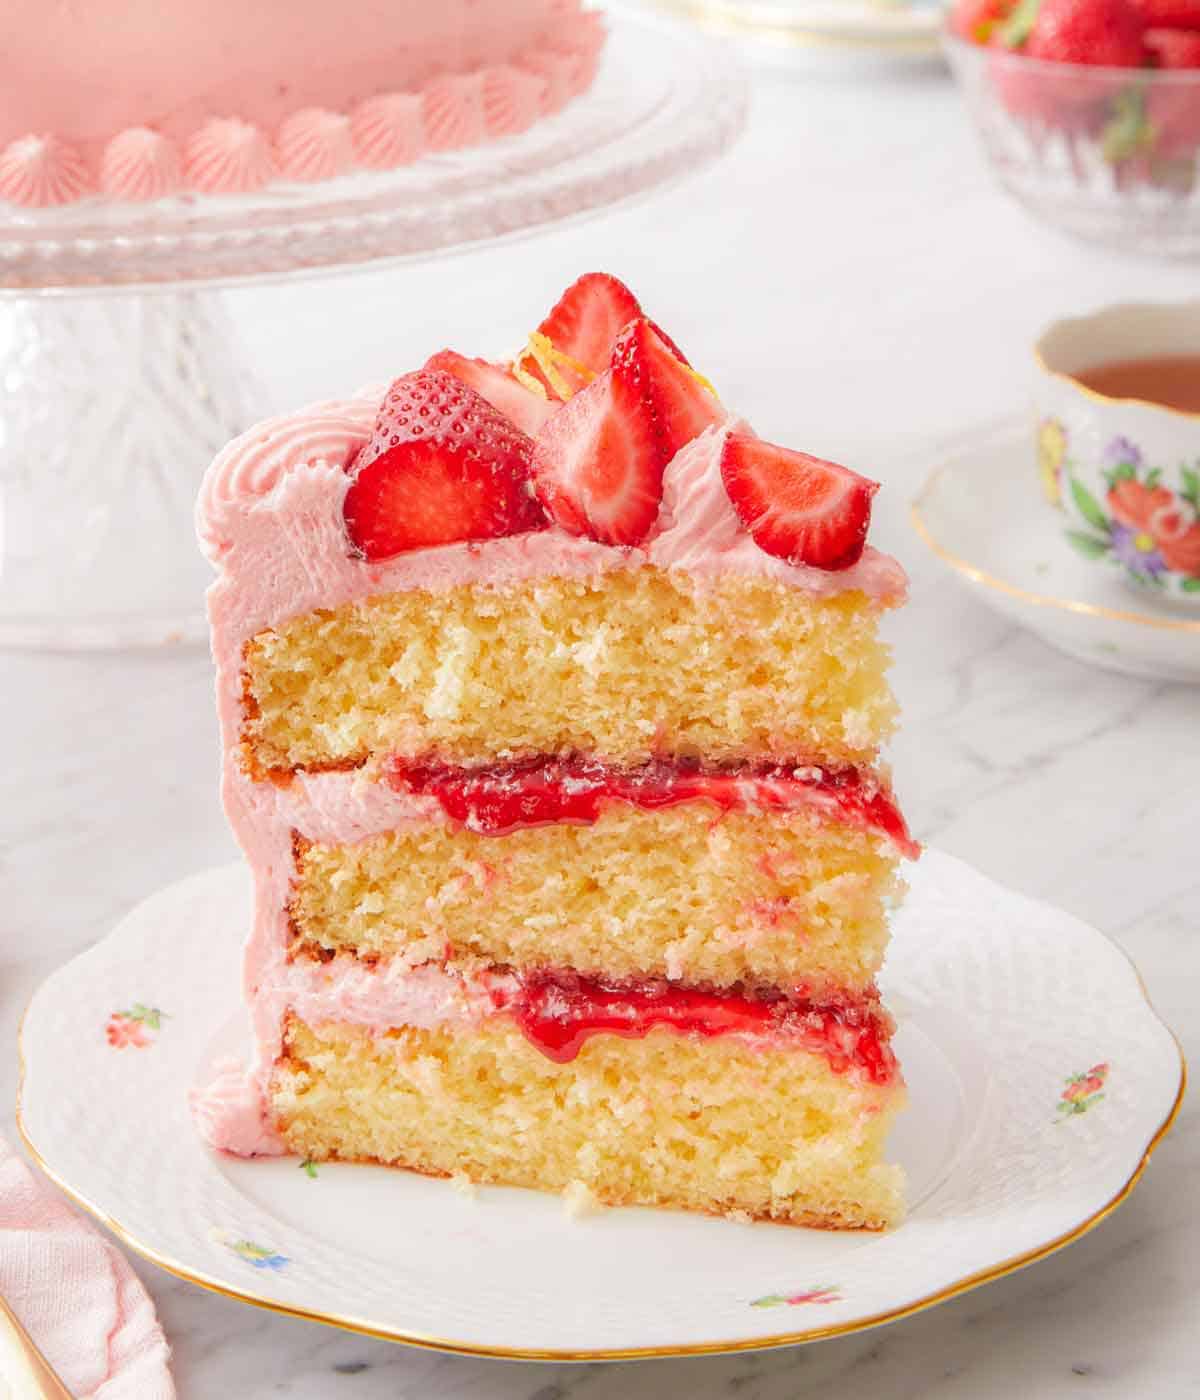 A slice of strawberry lemonade cake showing the three layers with frosting and jam in between the layers.